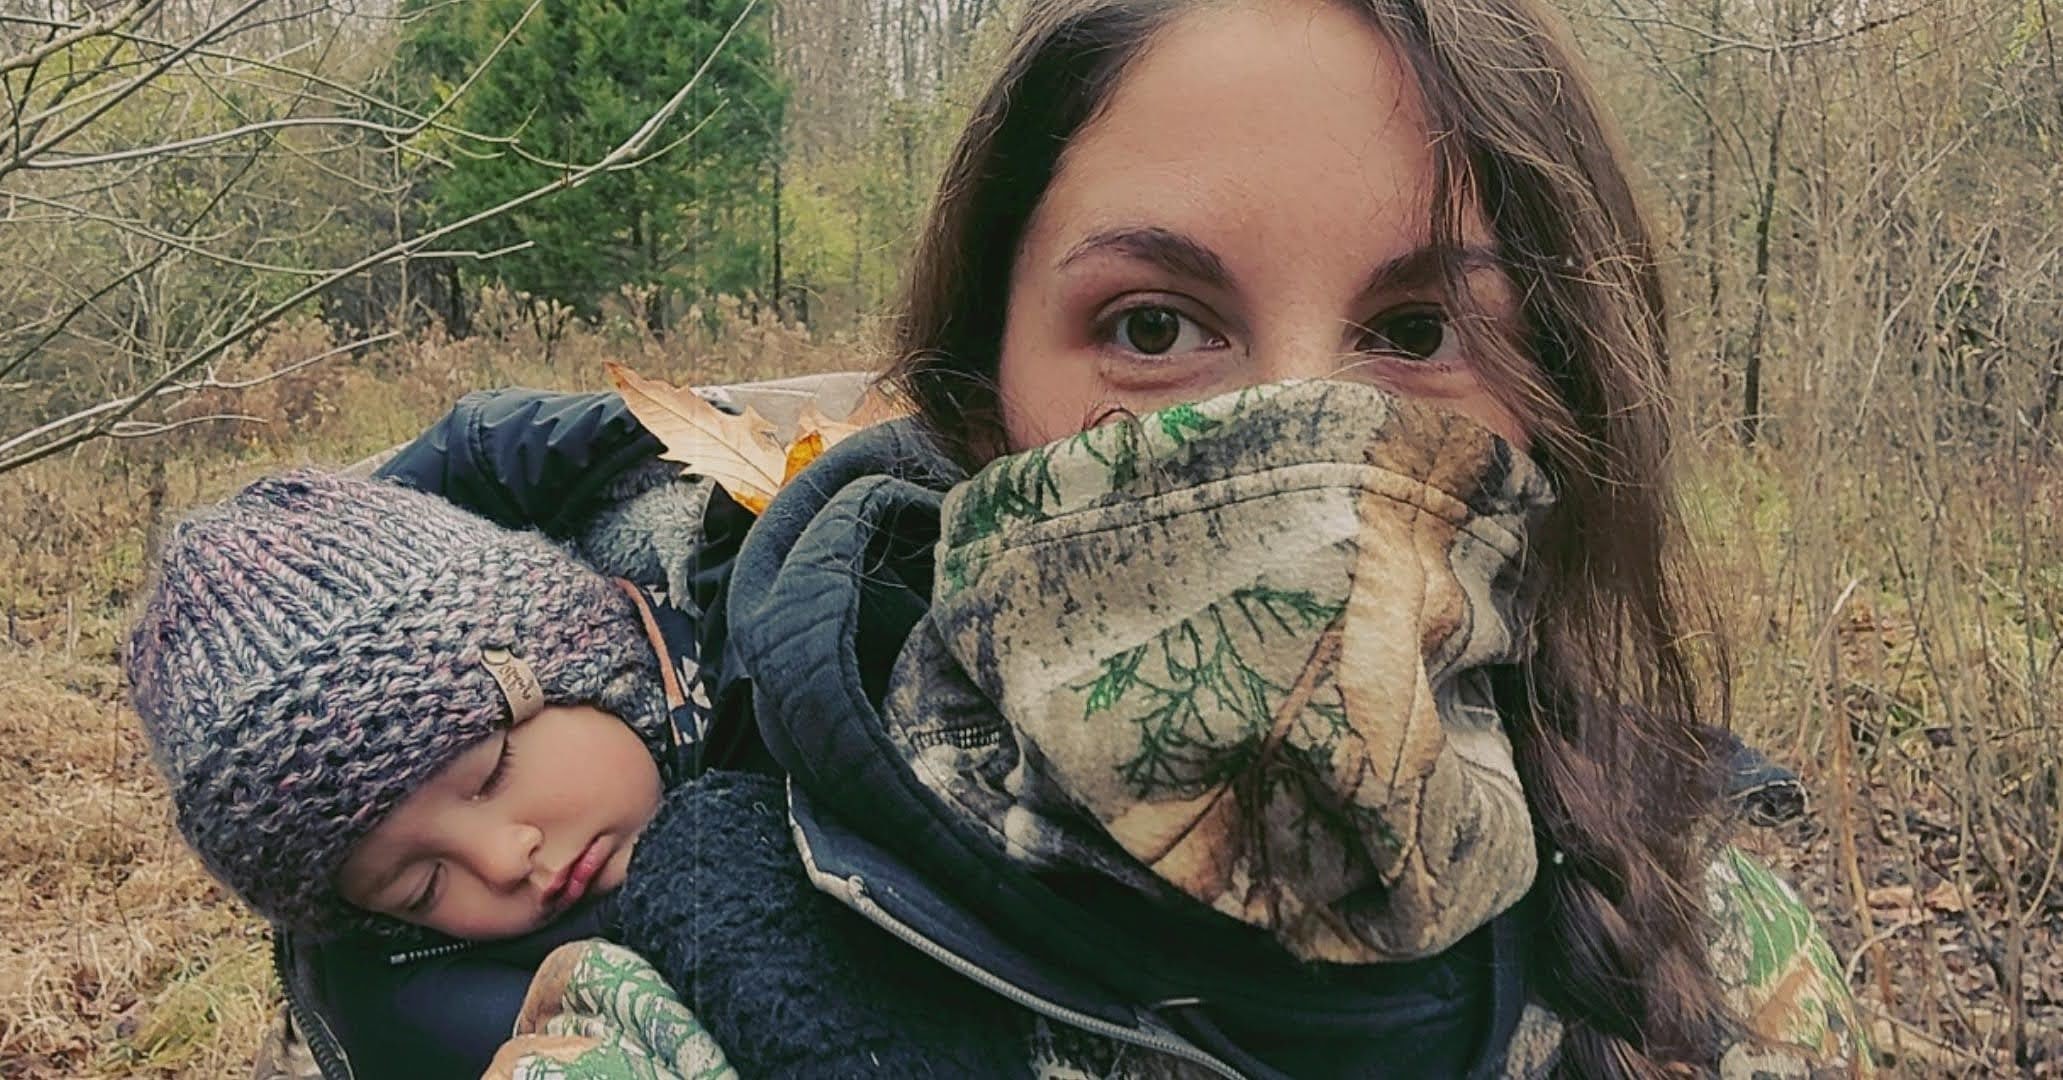 Hunting with kids is a lot of work, but rewarding.